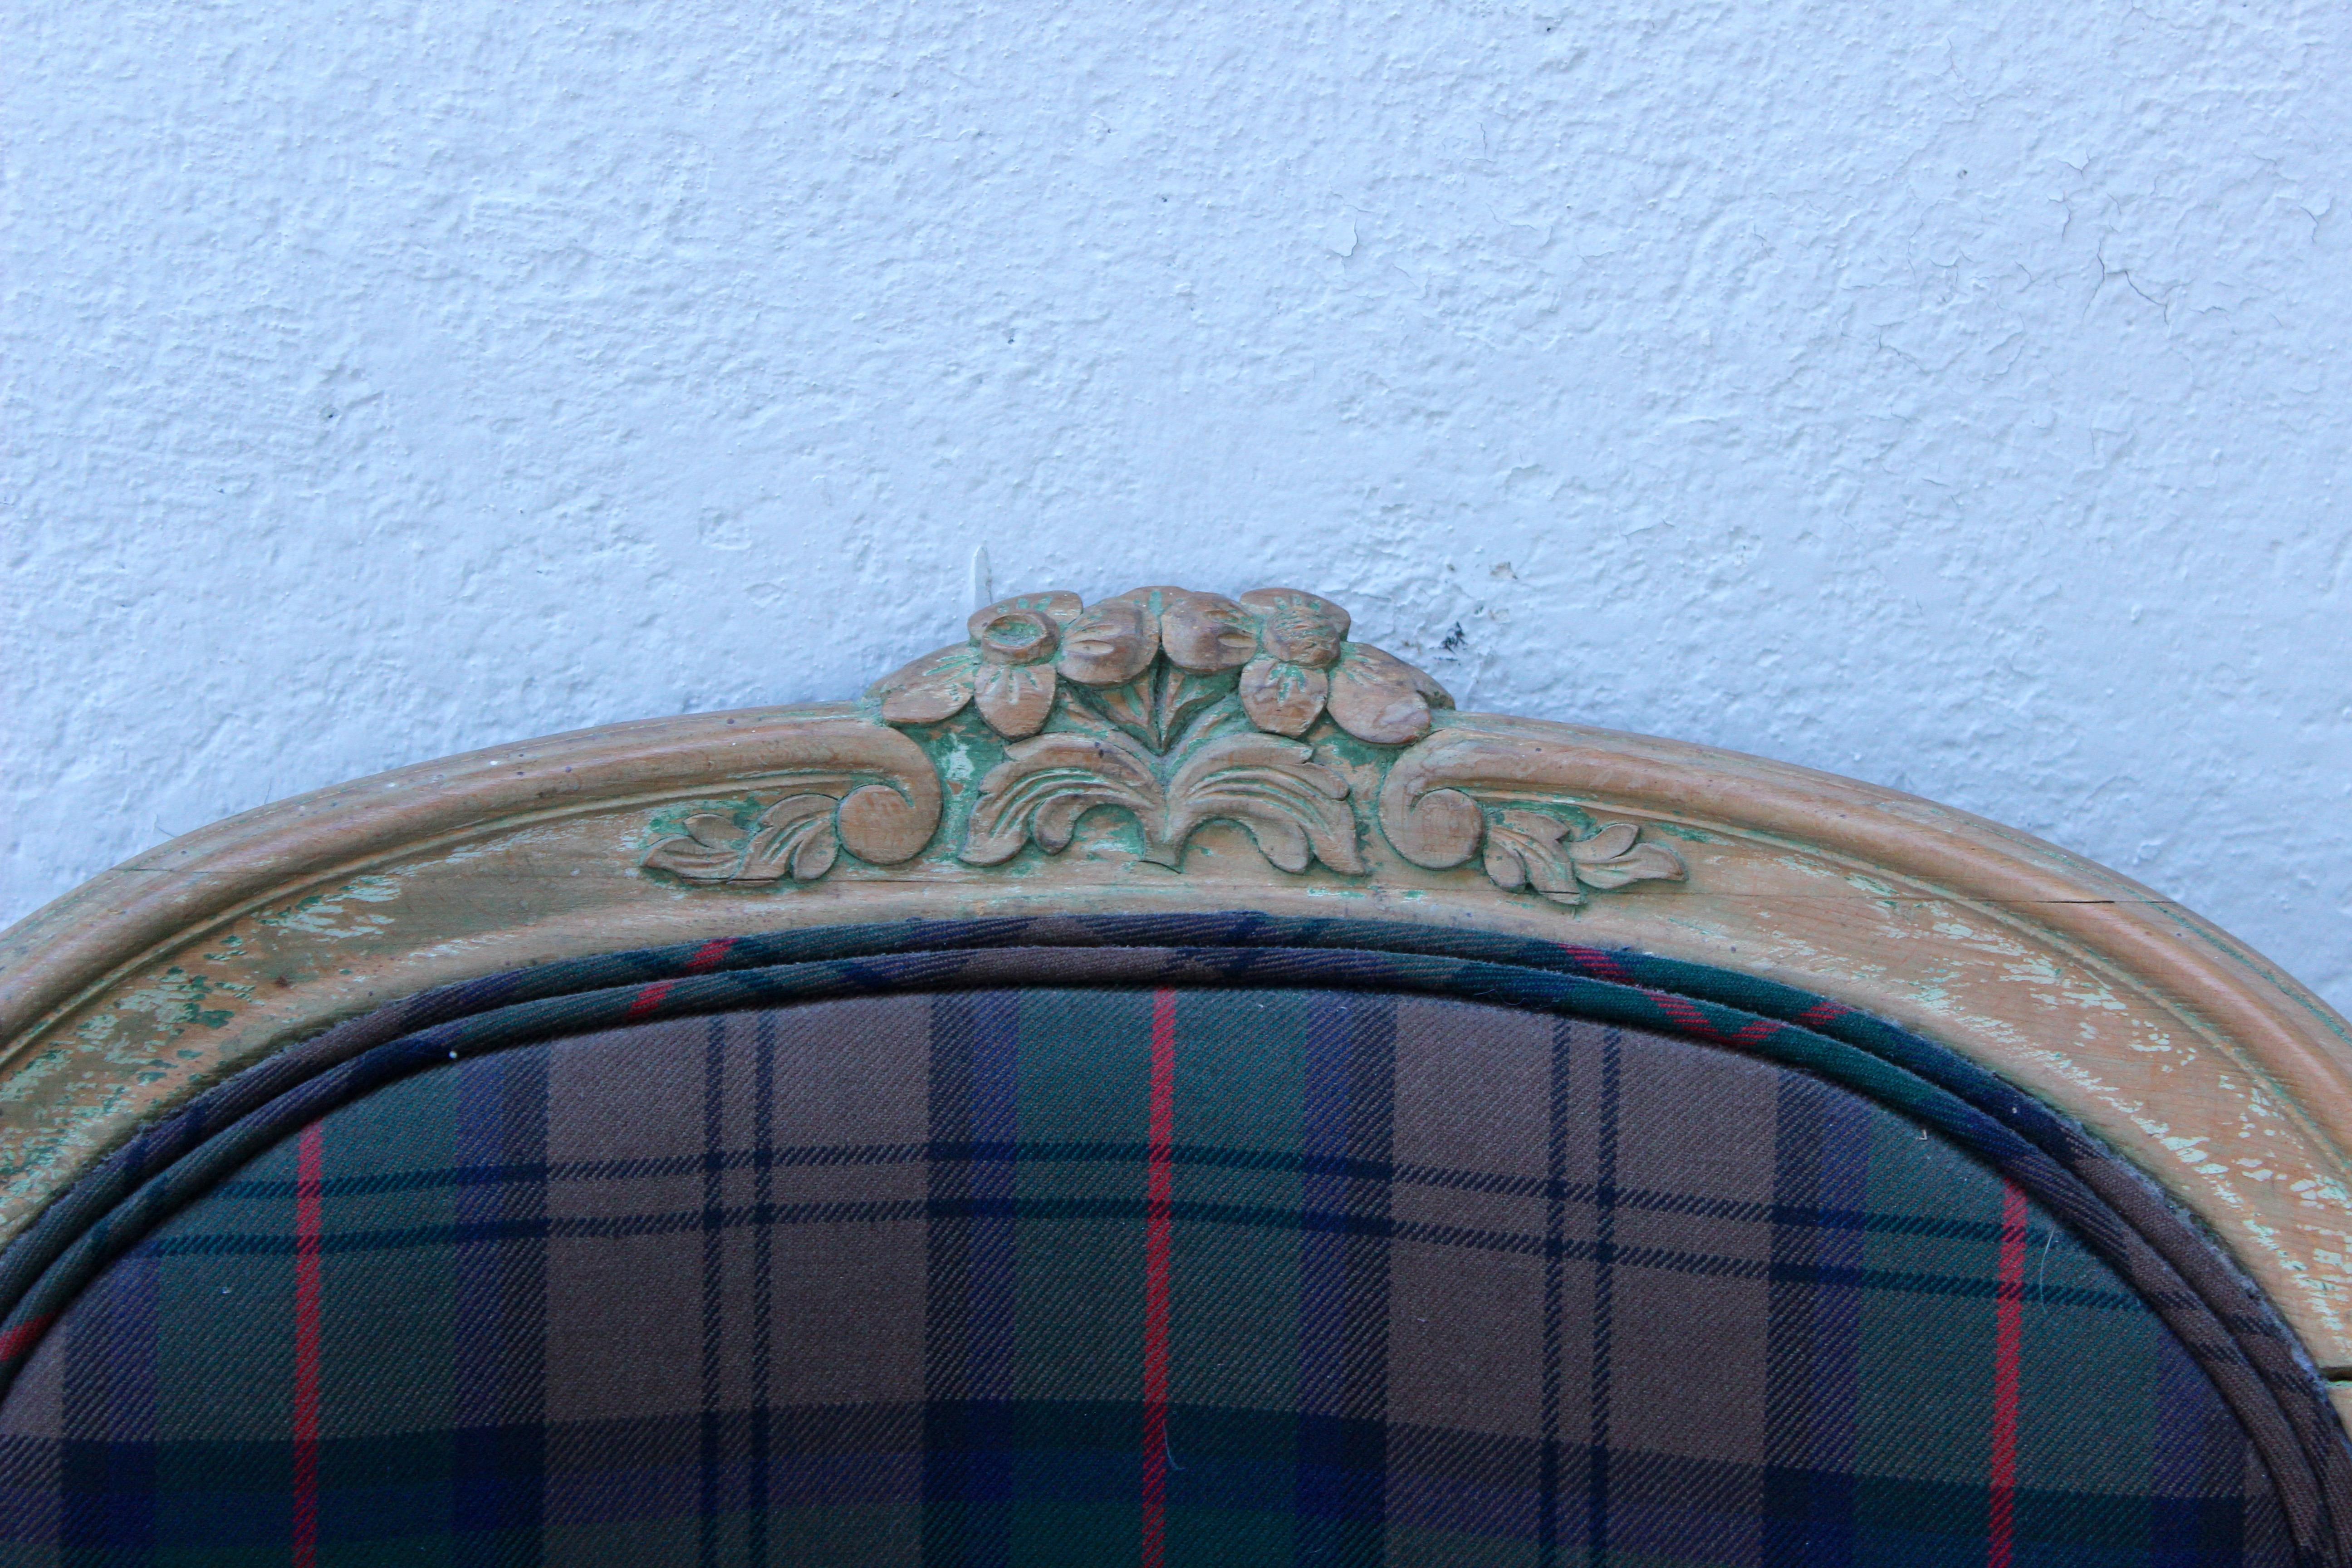 Early 19th century Louis XV Style Fauteuil upholstered in wool plaid.

Measures: Seat height 18